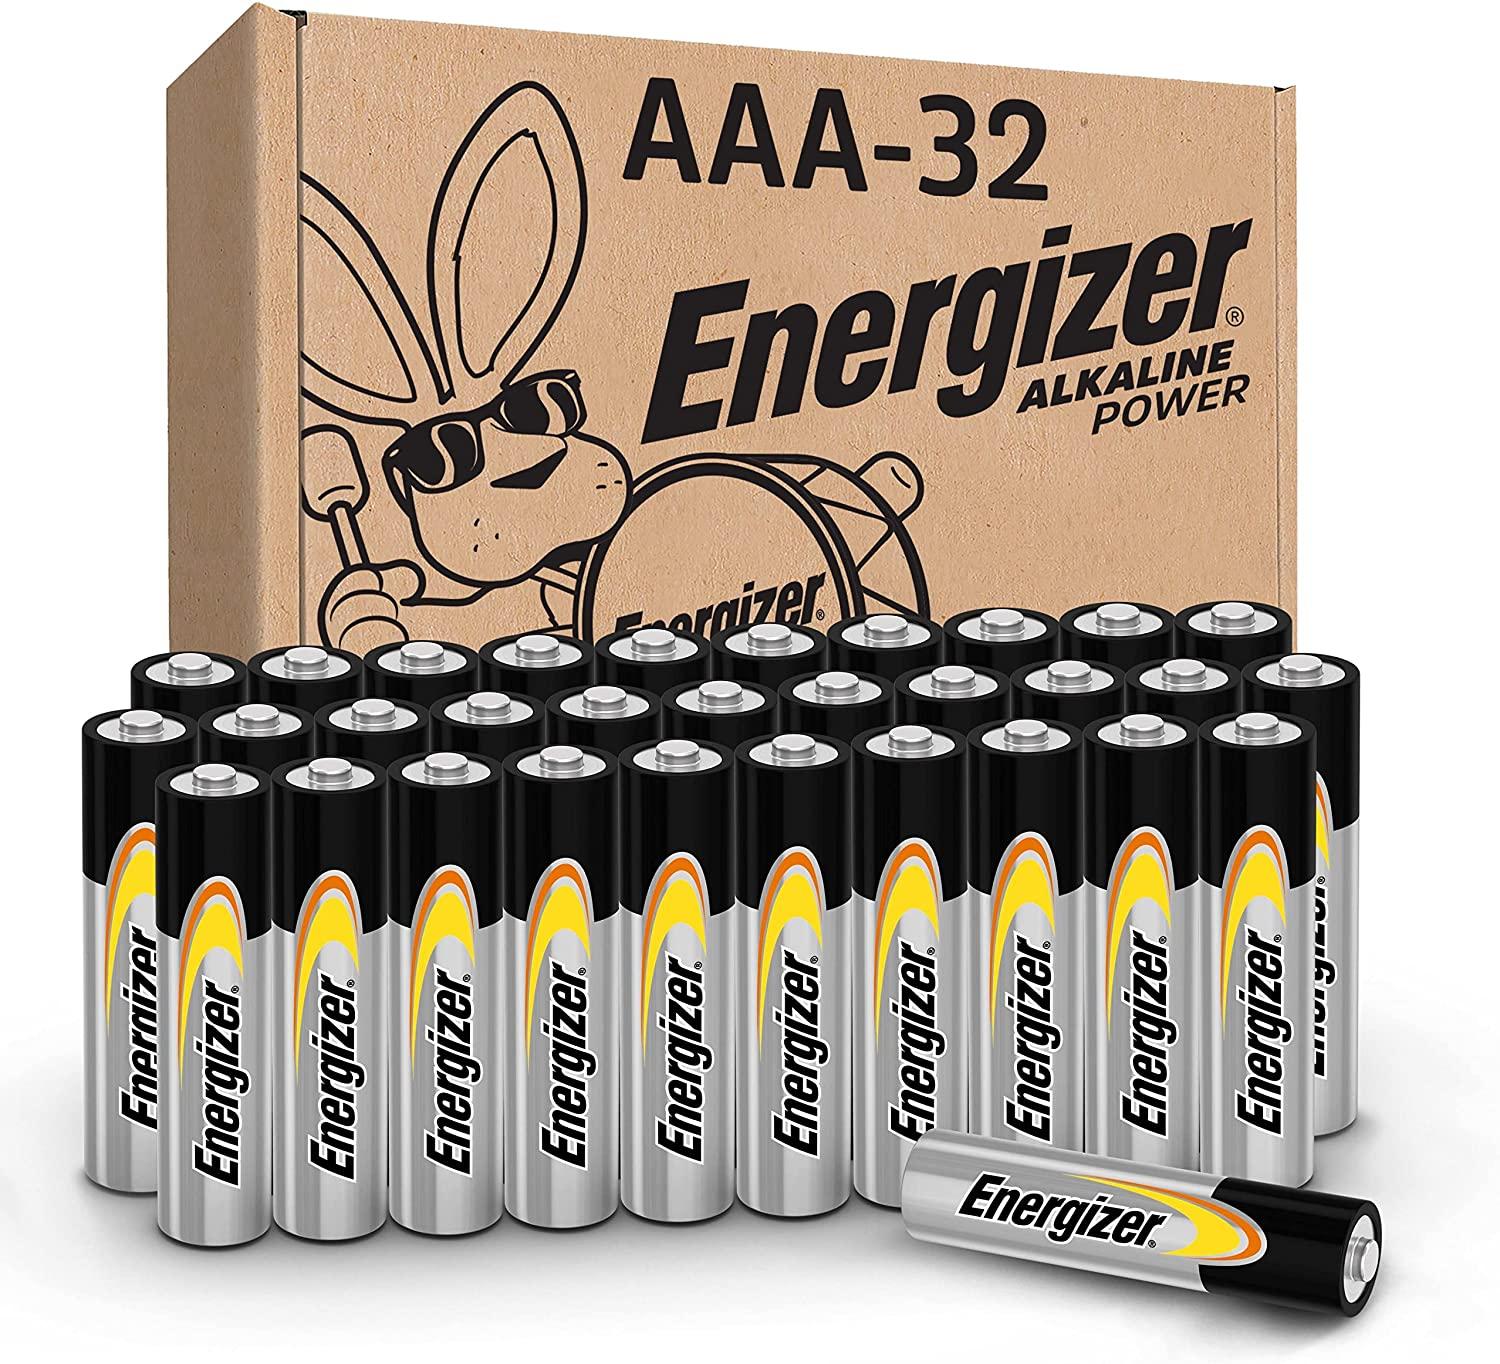 32 Energizer AAA Alkaline Batteries for $10.99 Shipped